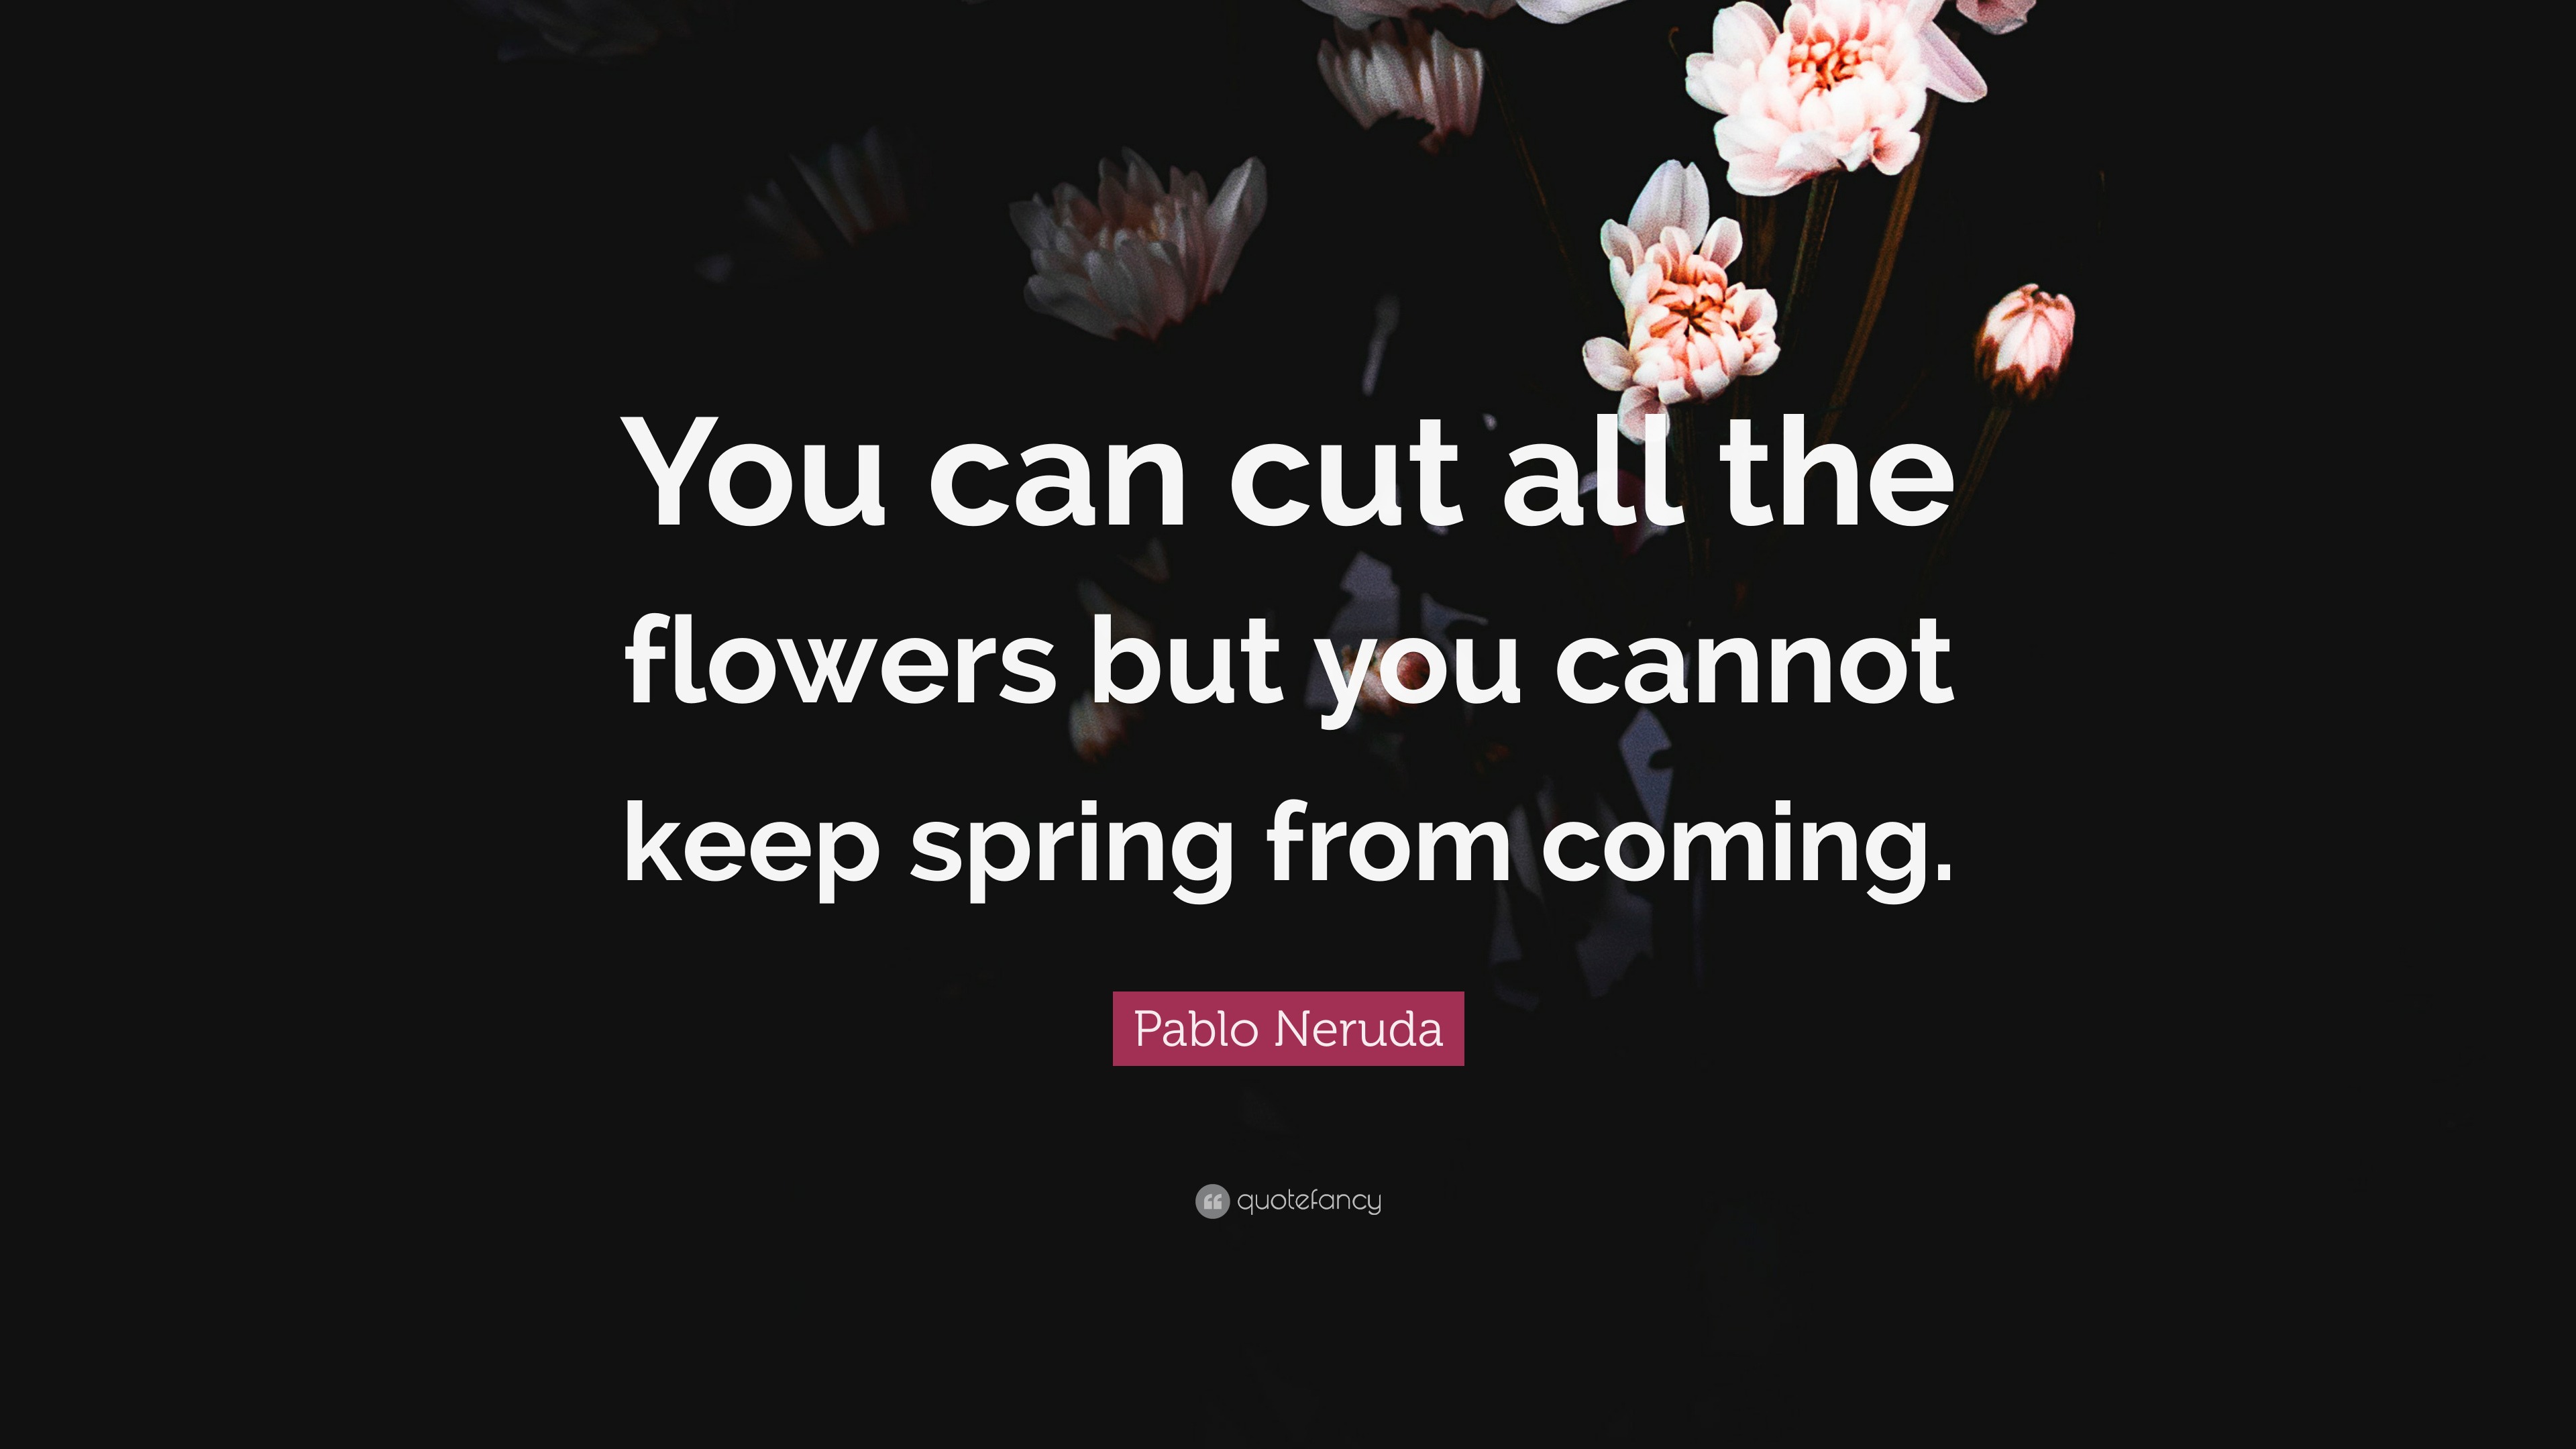 Pablo Neruda quotes. Flowers quotes. You can чёрный цвет.